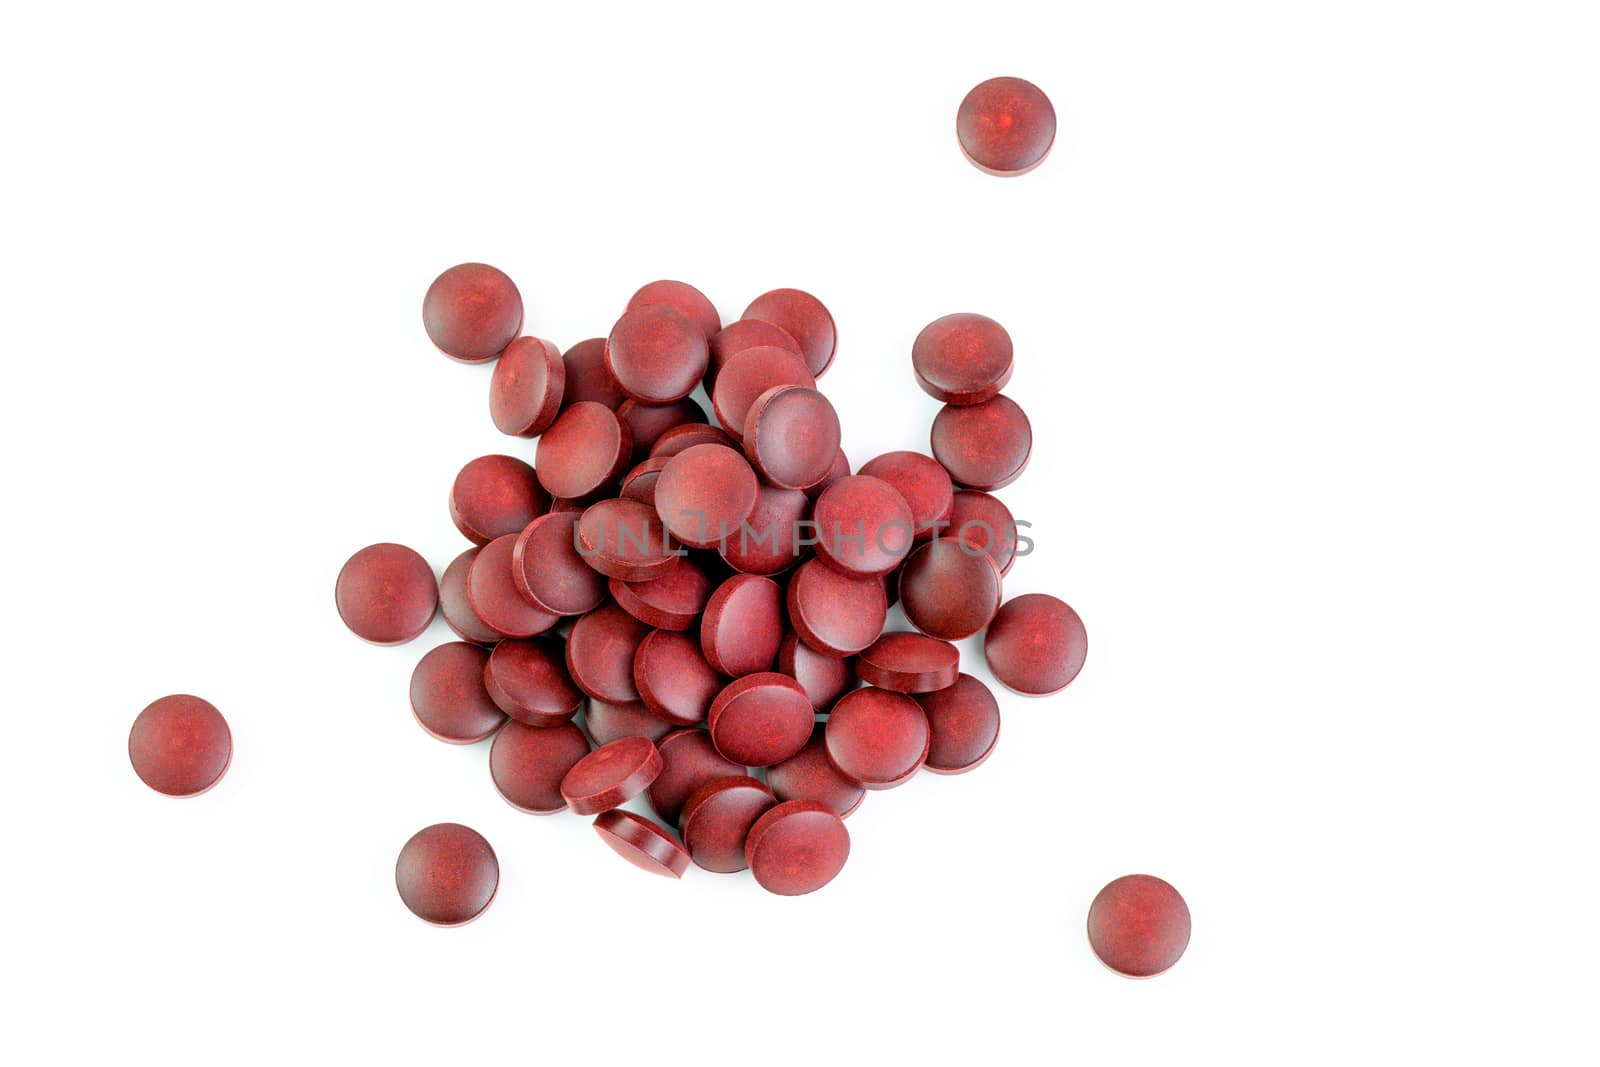 a small pile of red compacted powder pills isolated on white background in linear perspective.